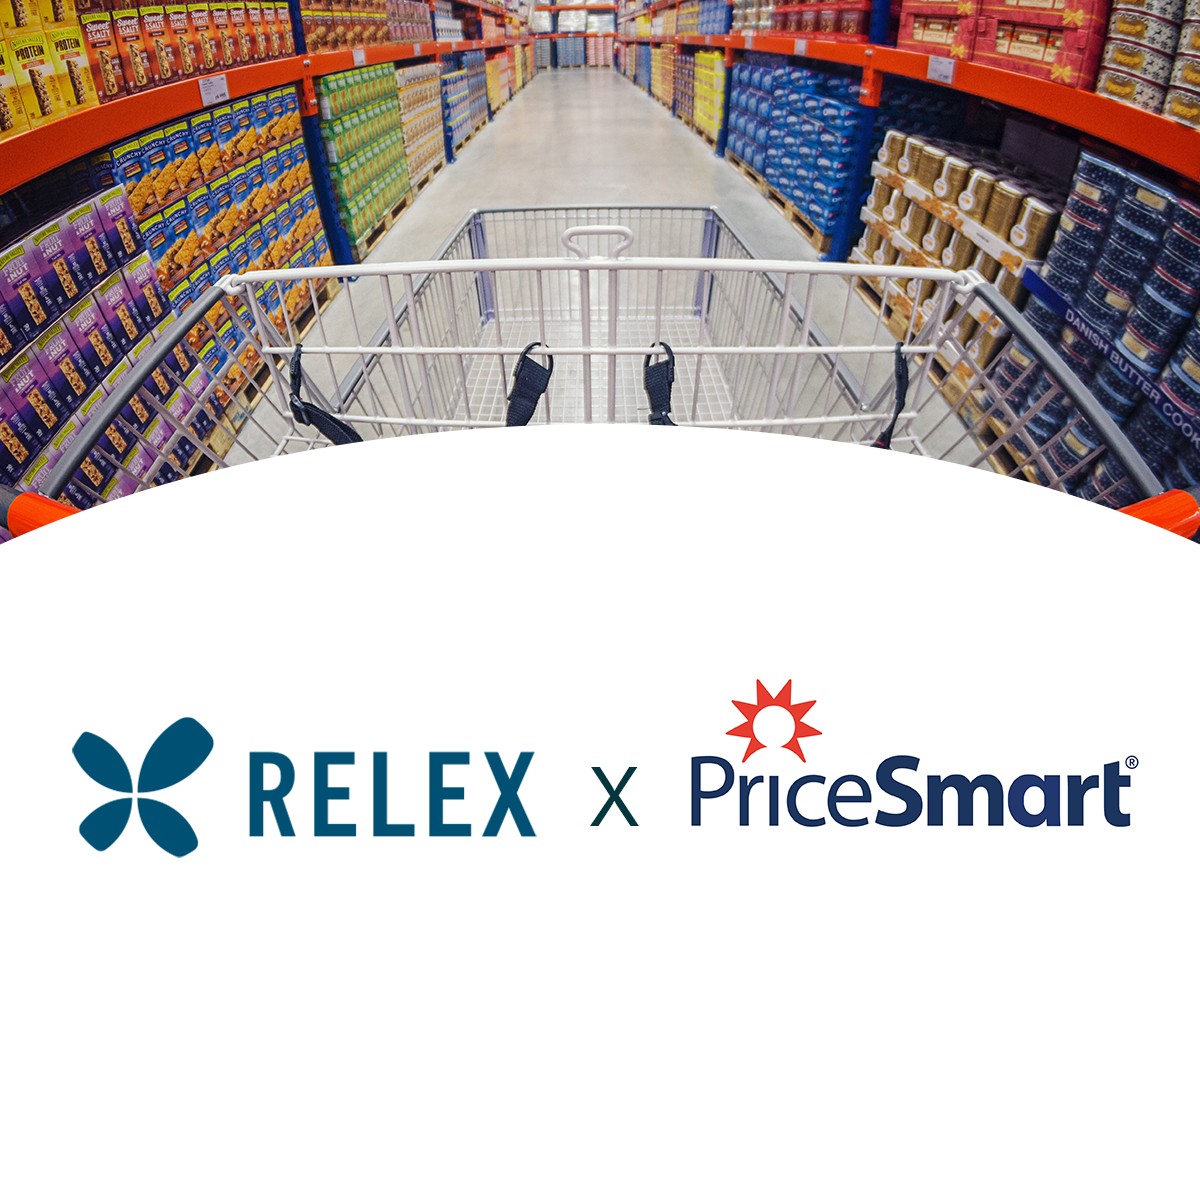 Giant Tiger Selects RELEX Solutions to Drive Integrated Supply Chain  Improvements